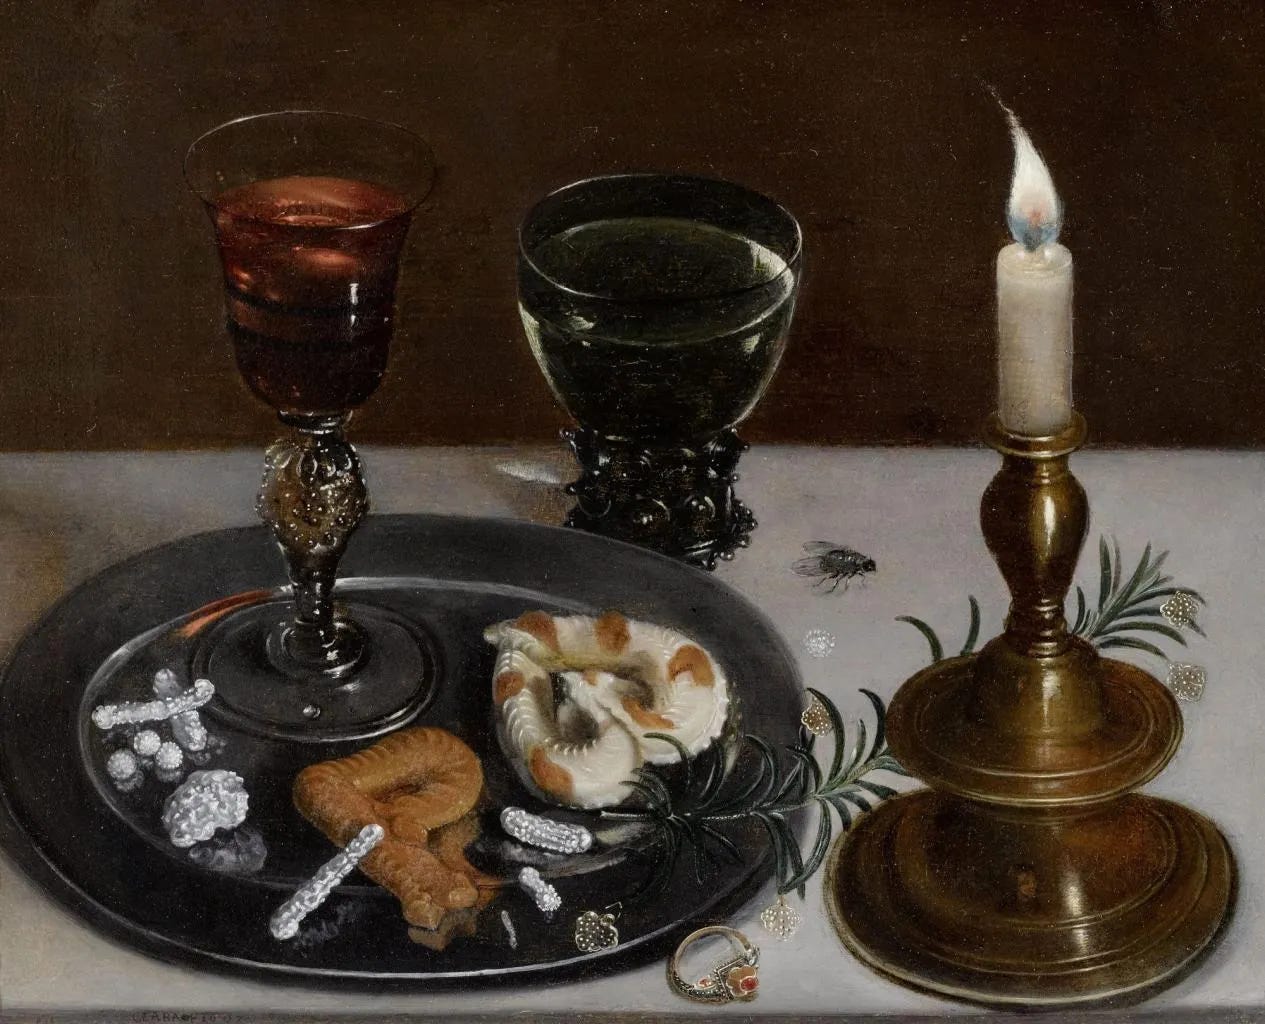 Still life with dainties, rosemary, wine, jewels and a burning candle - Clara  Peeters